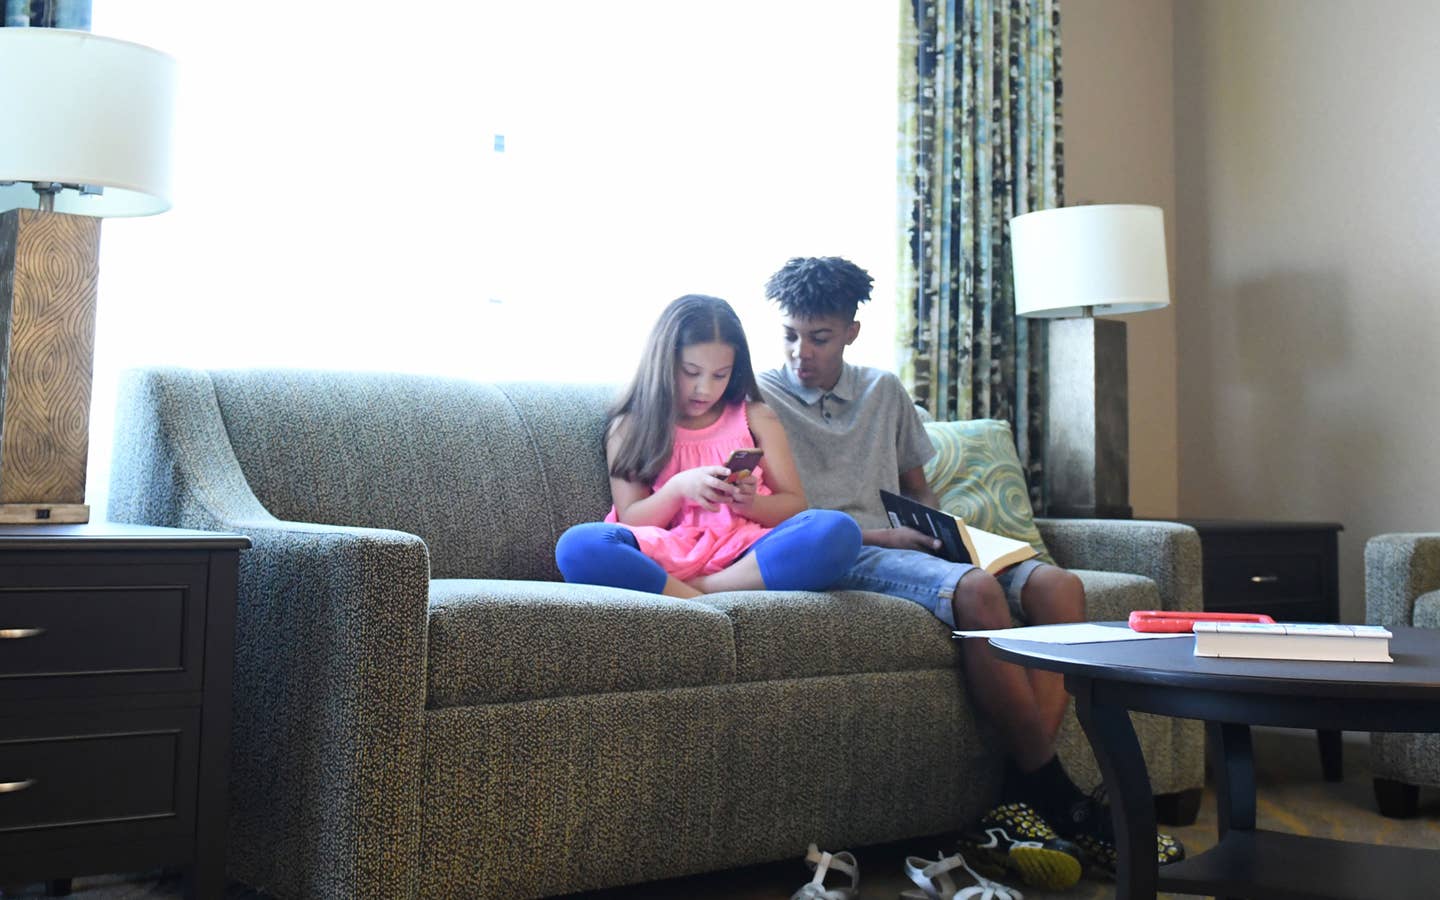 Two children sitting in a living room in a villa looking at smartphone together